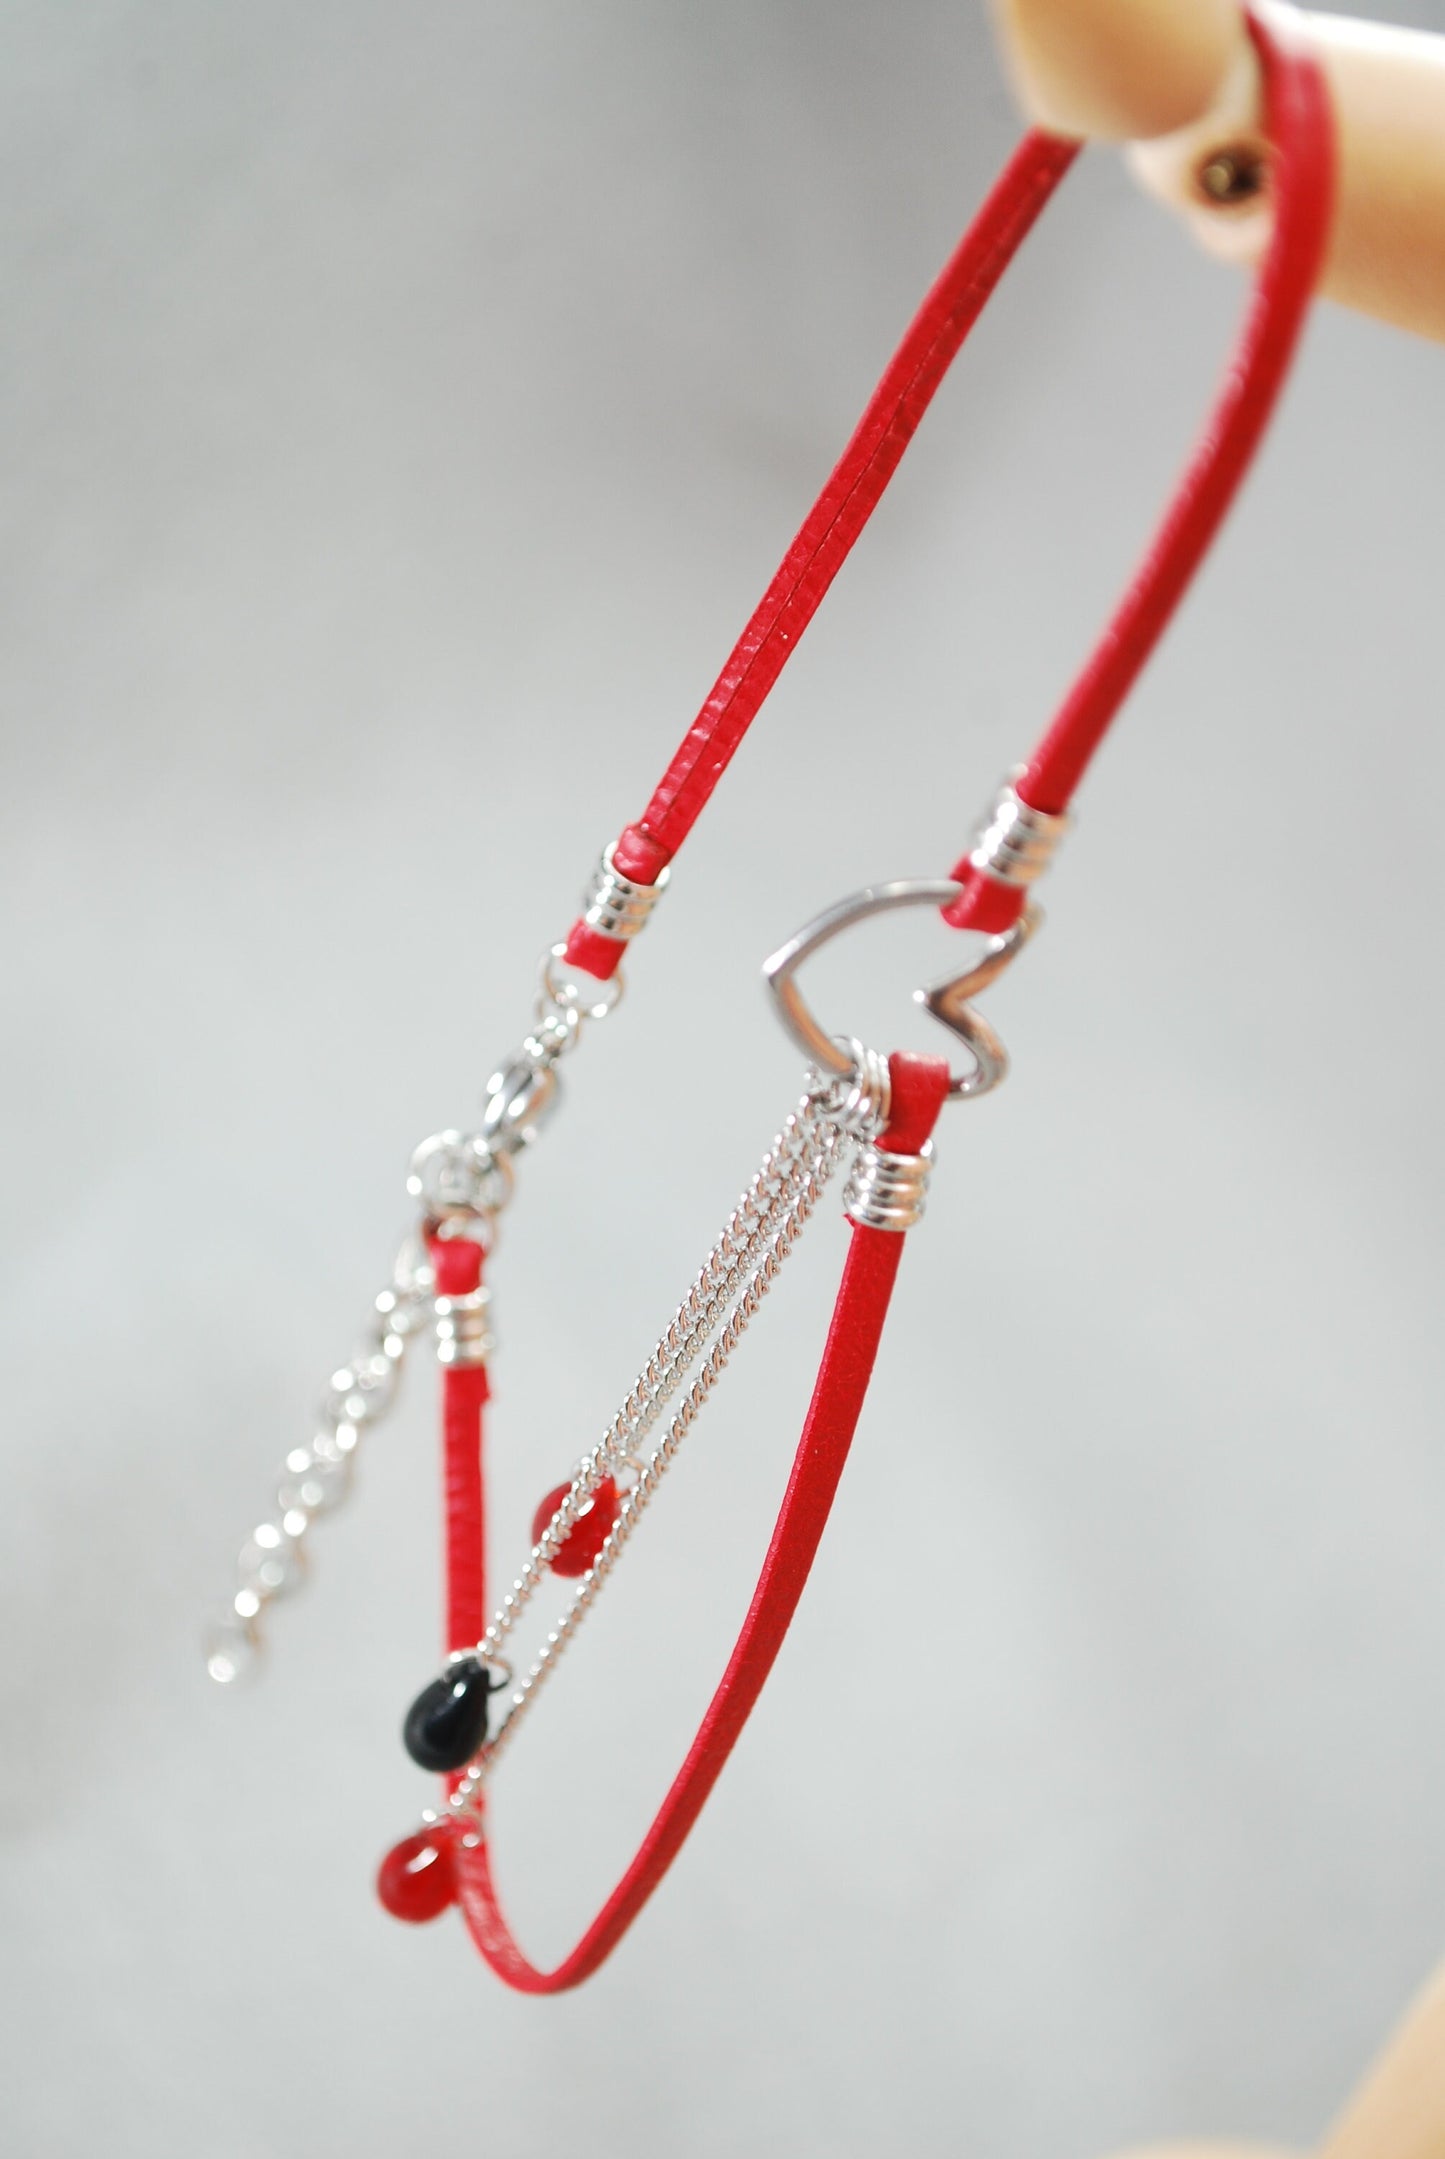 Bold Red Leather Choker with Stainless Steel Heart Pendant - Exclusively Designed by Estibela, Adjustible length.